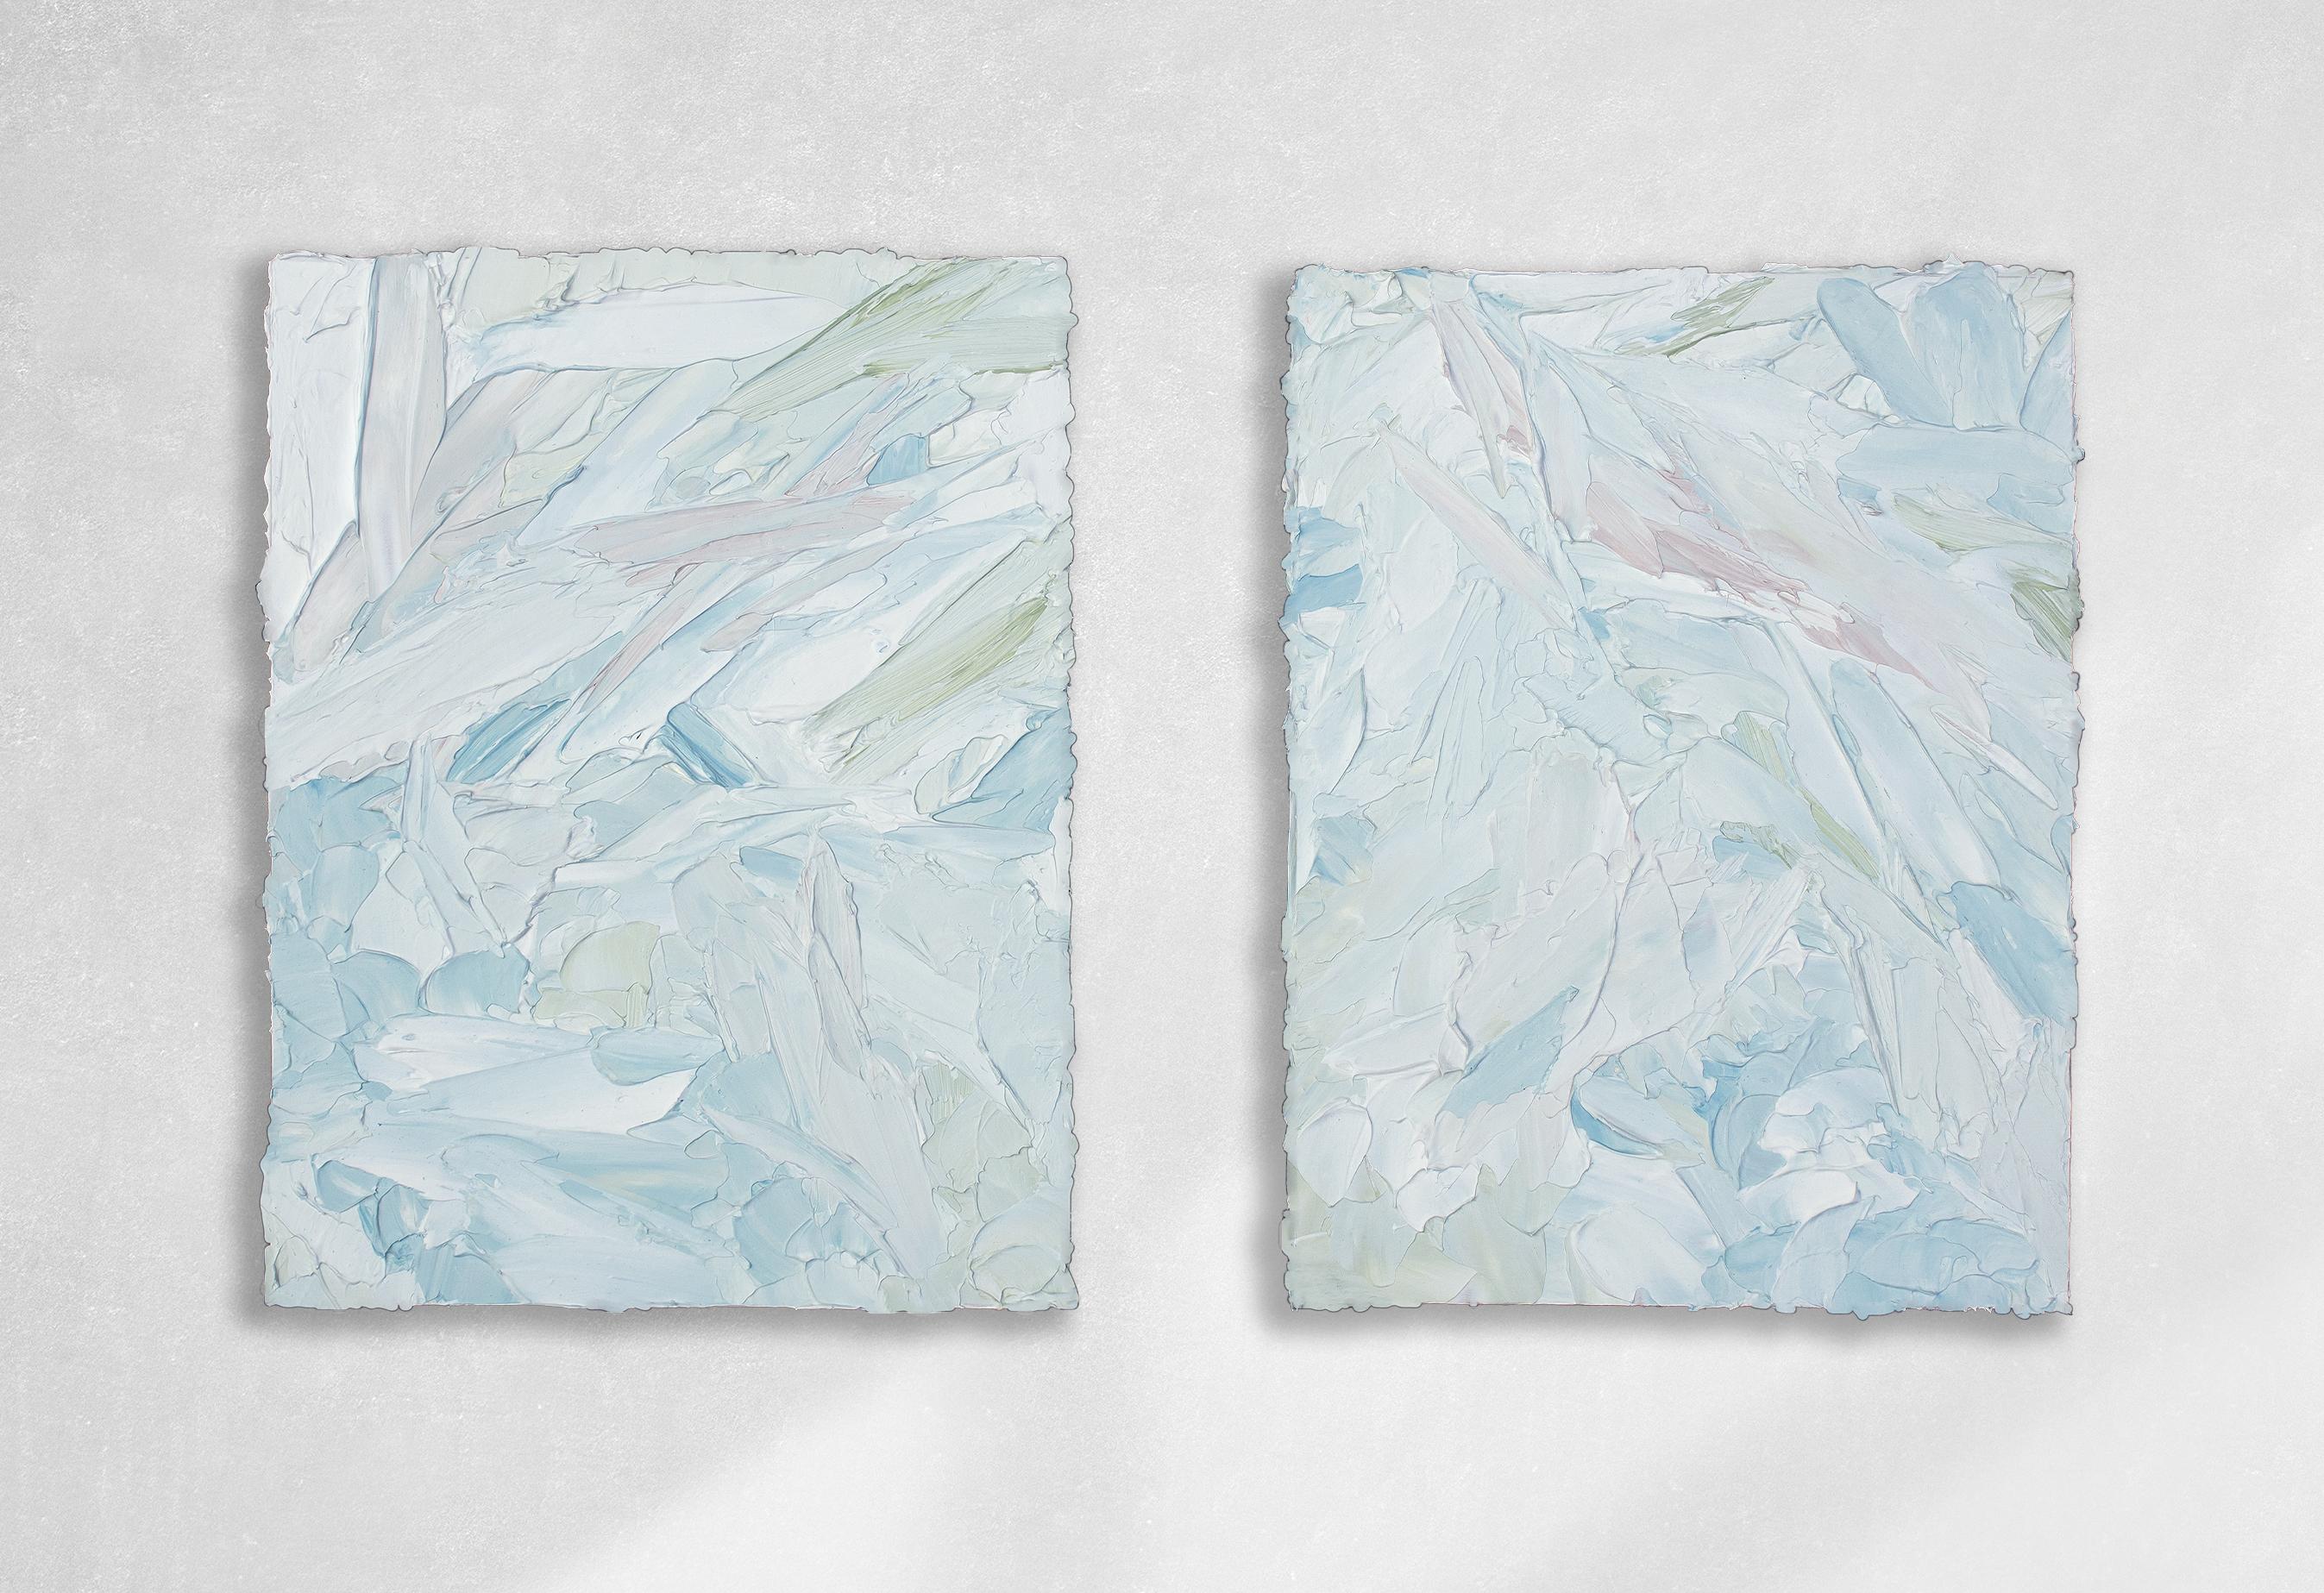 Peinture diptyque abstraite « Walk in the Park I and II »